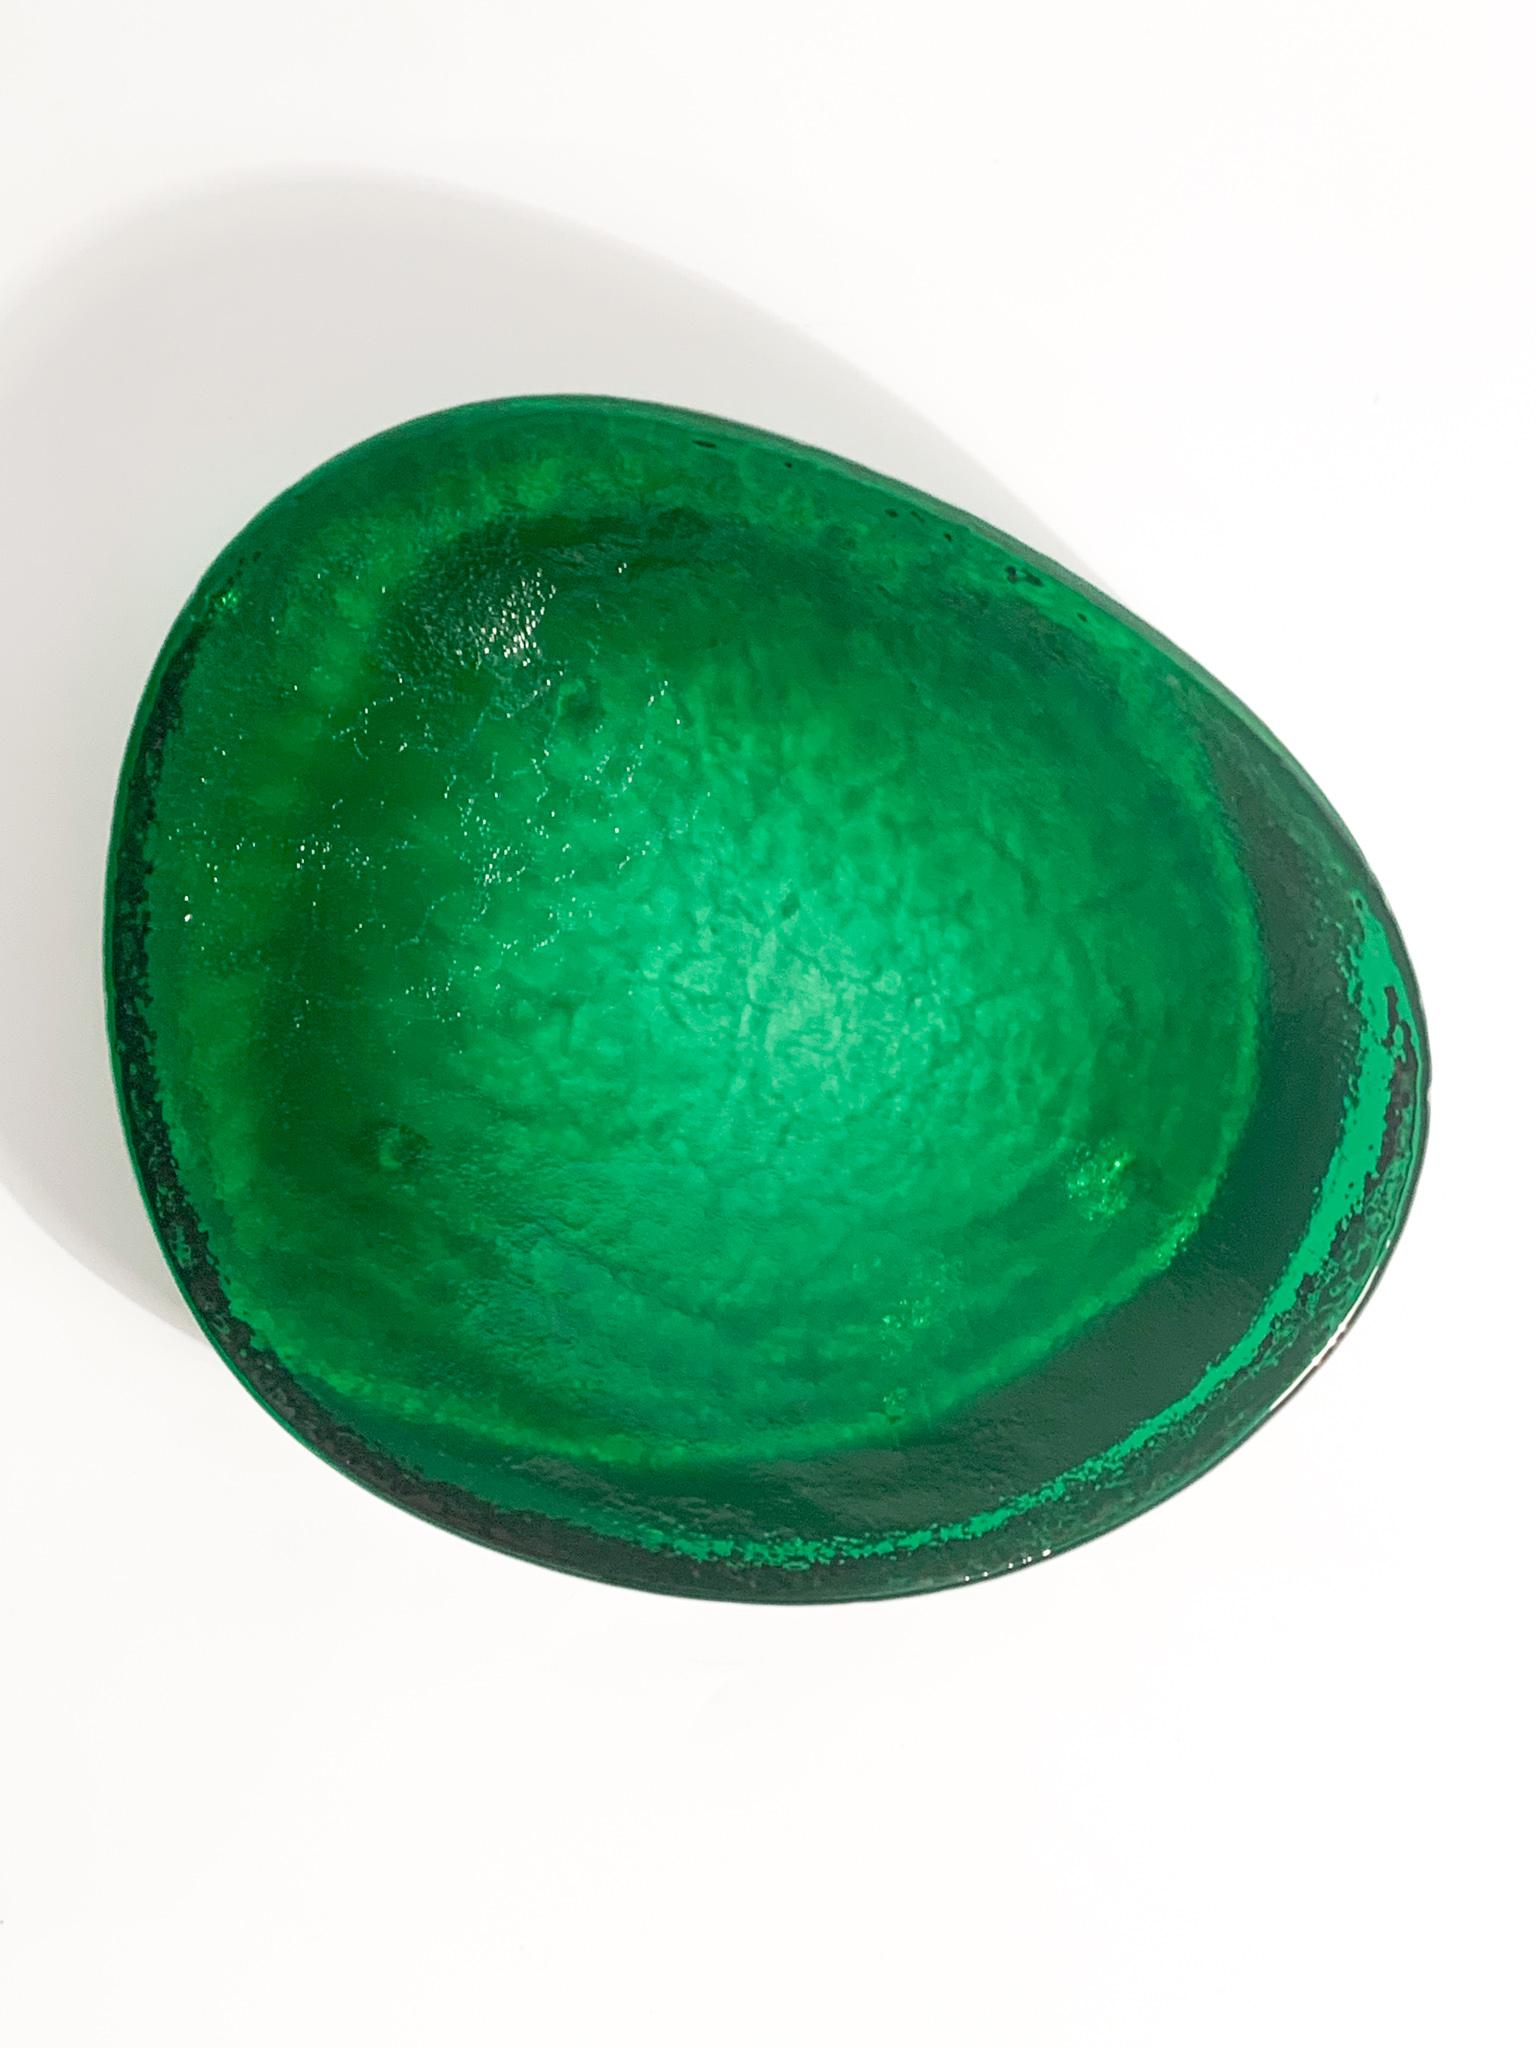 Green Murano glass pocket emptier bowl, made by Nason in the 1980s

Ø cm 18 Ø cm 15 h cm 3

Carlo Nason, born in Murano in 1935 from one of the oldest families of glassmakers on the island, he was a great master glassmaker. He grows up frequenting